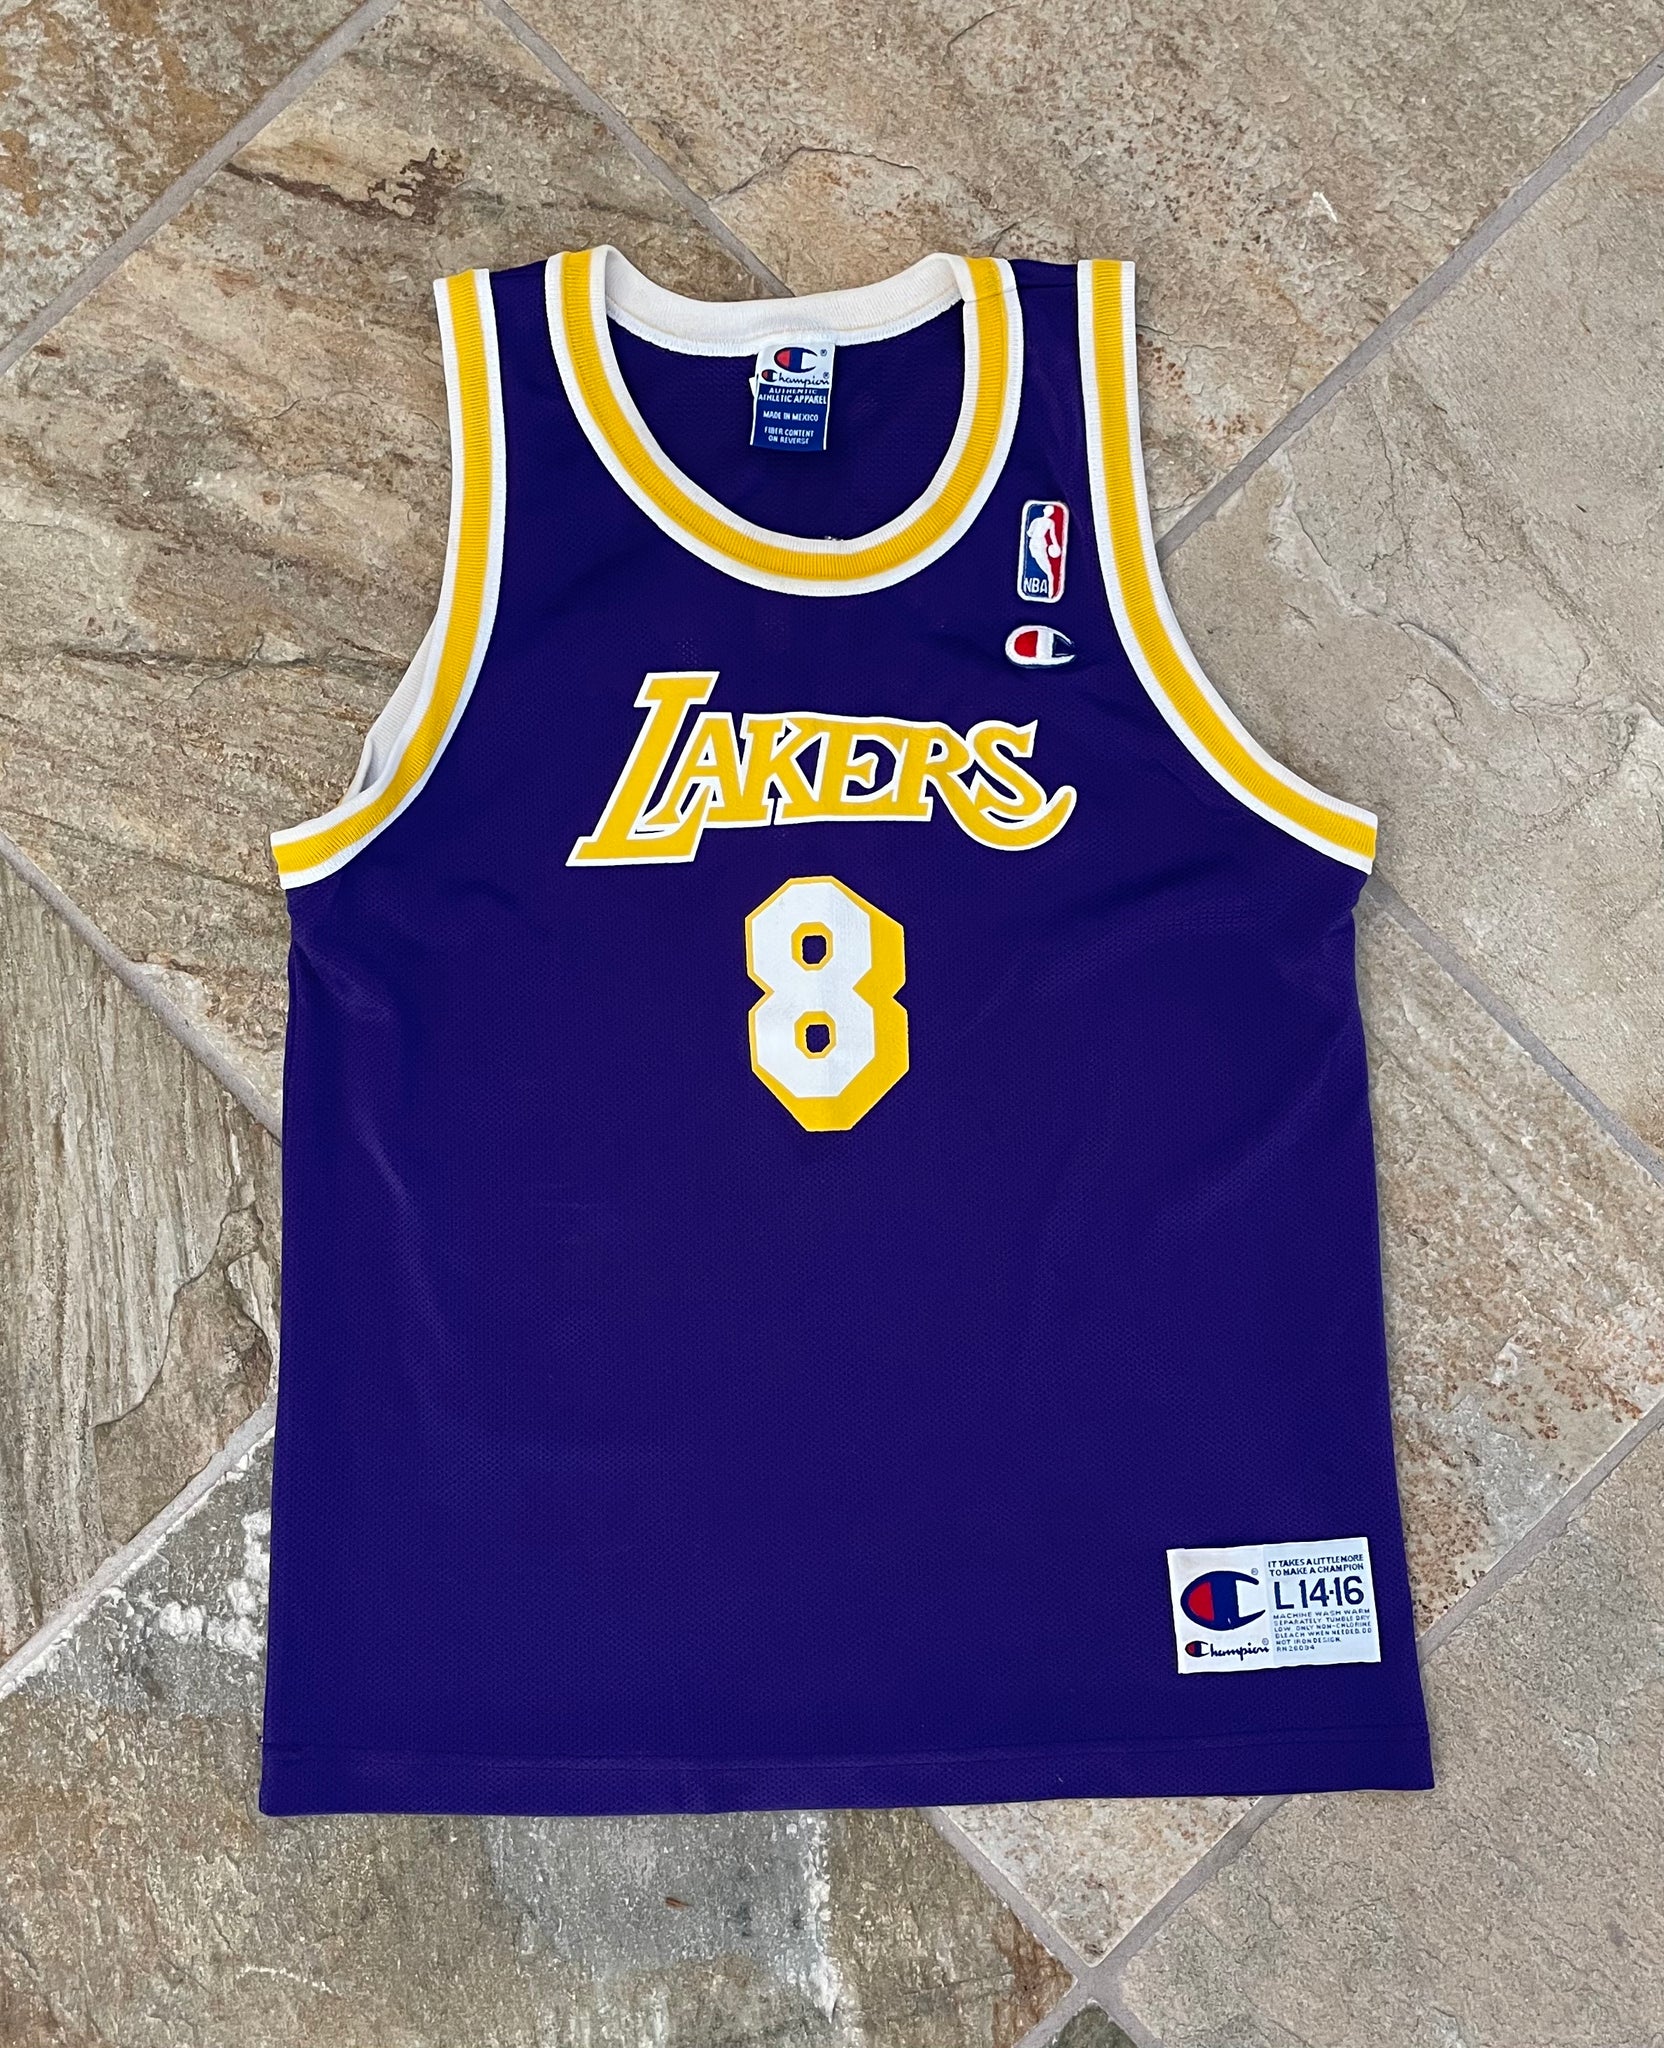 Old Lakers Jerseys & Shitrs for Sale - Vintage Sports Fashion